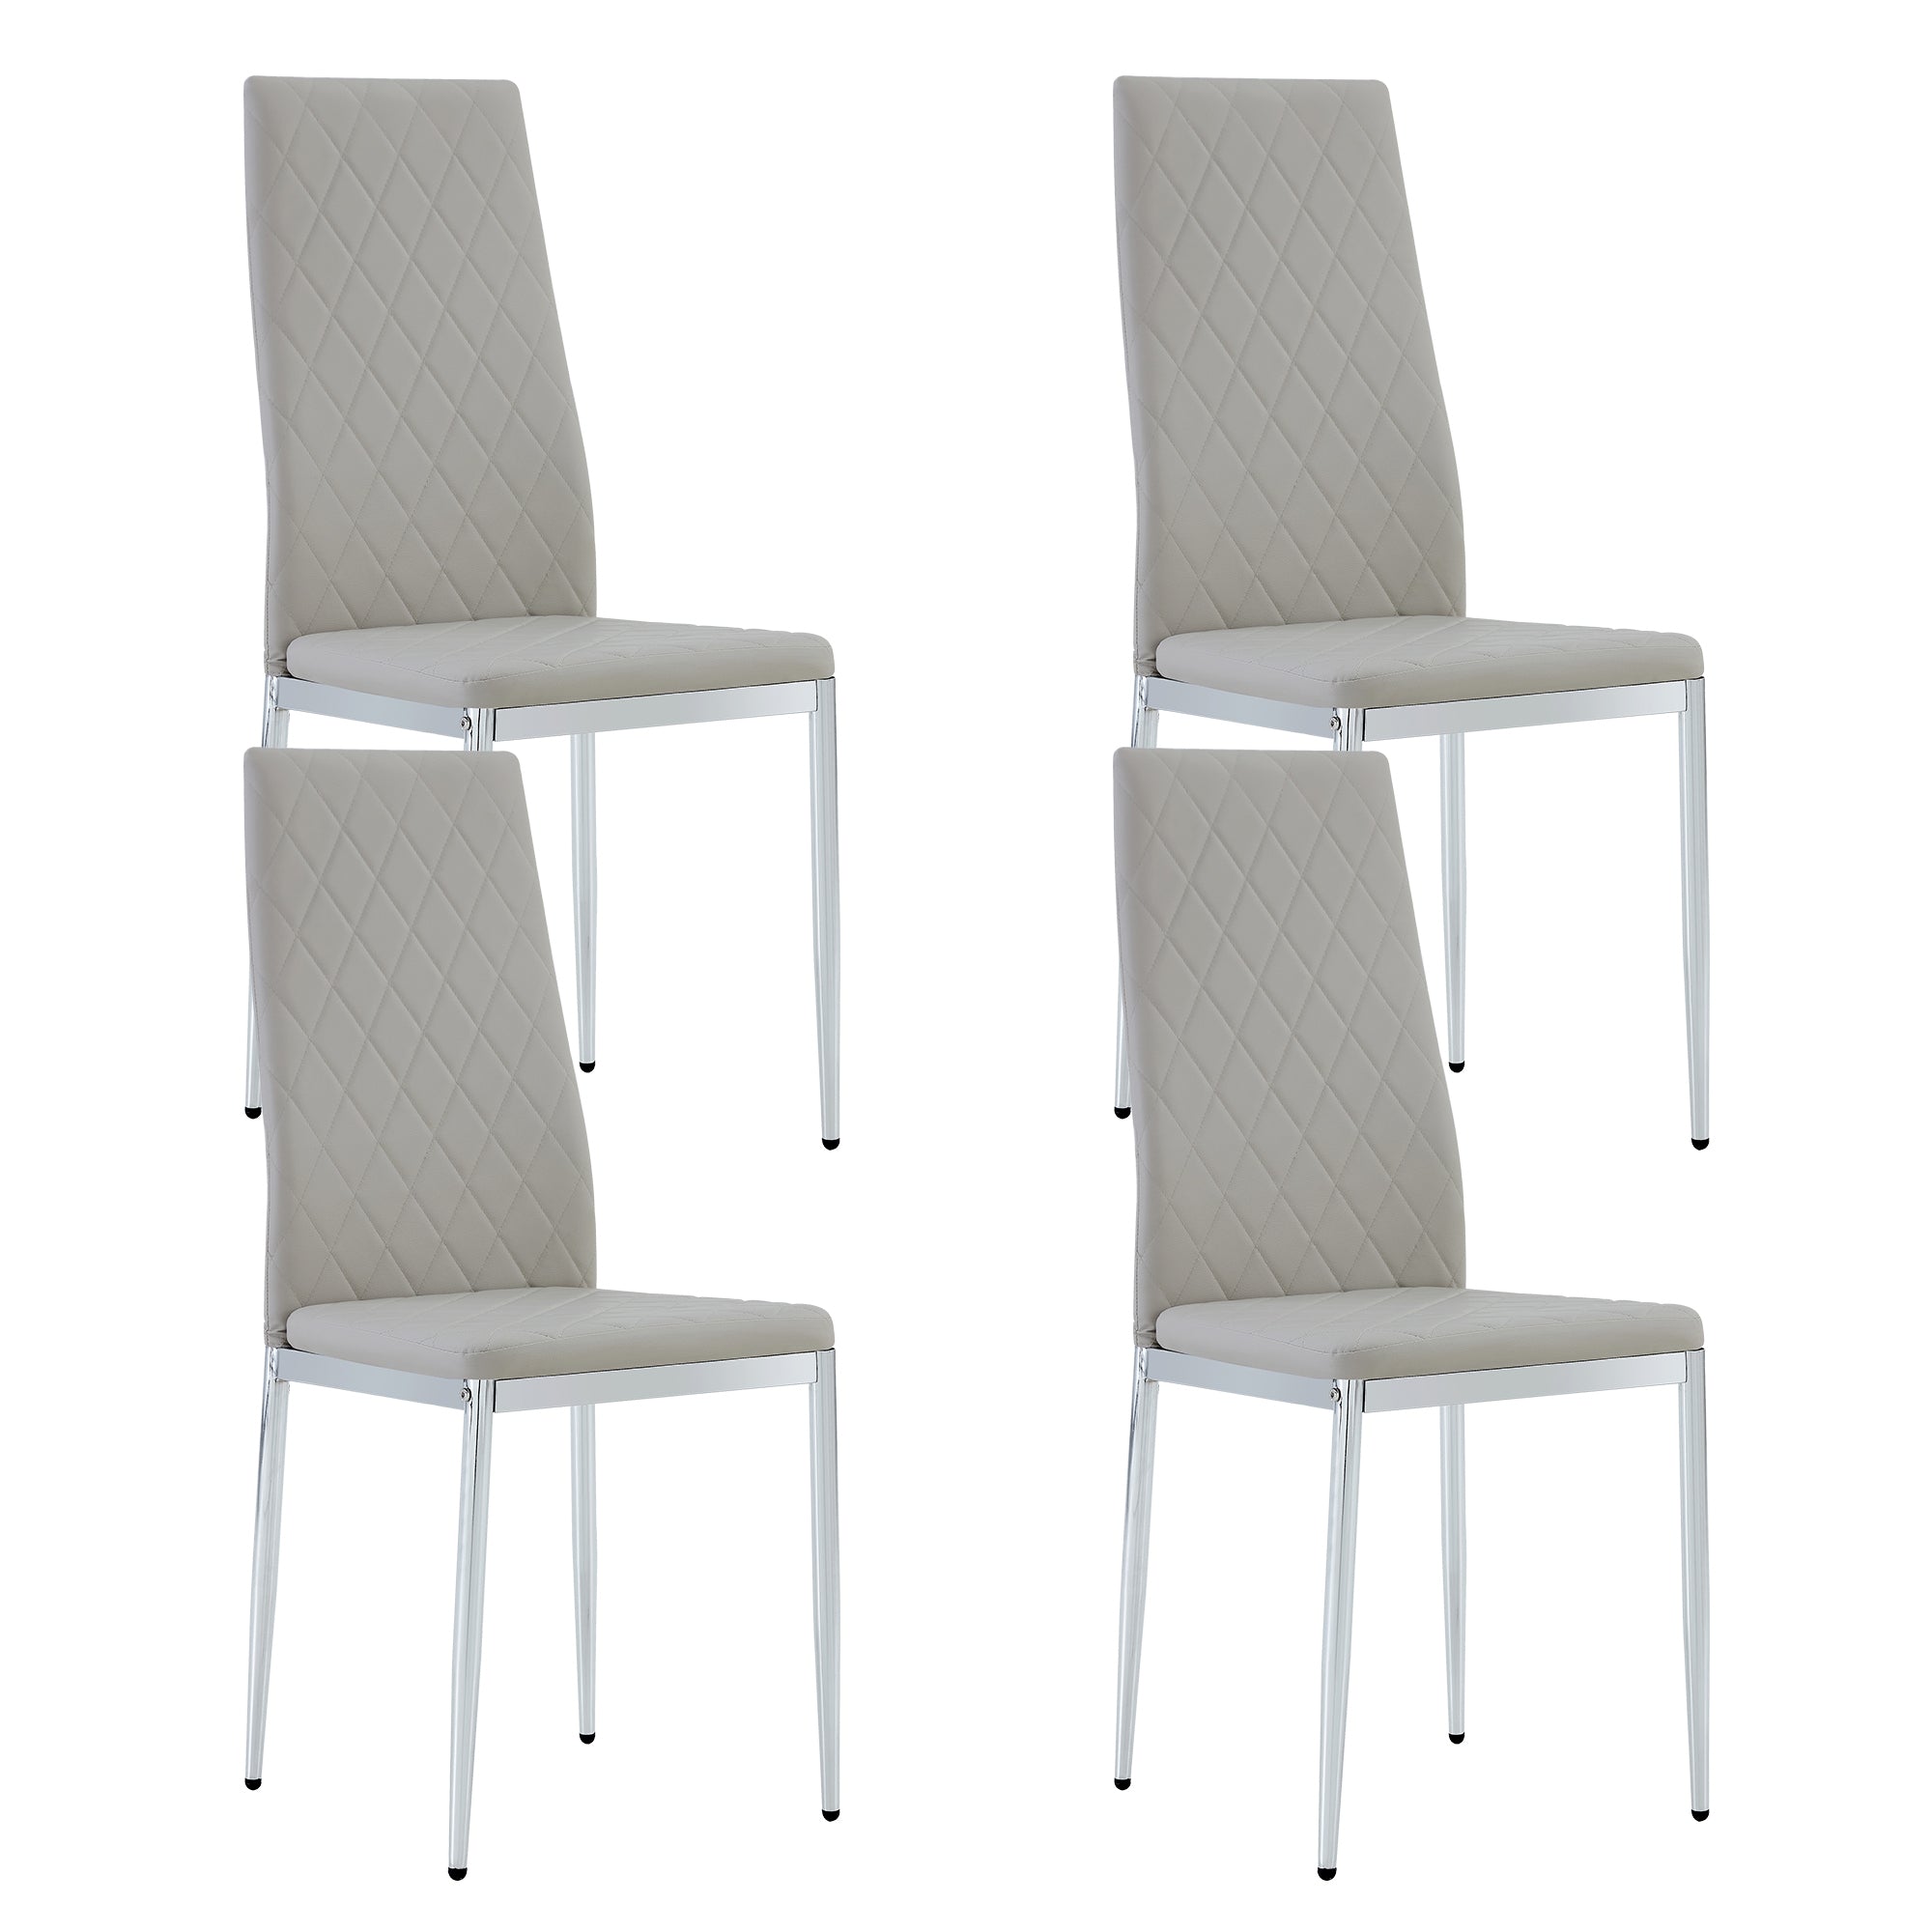 Set of 4Pc Modern Light Gray Faux Leather Dining chairs with Chromed Legs